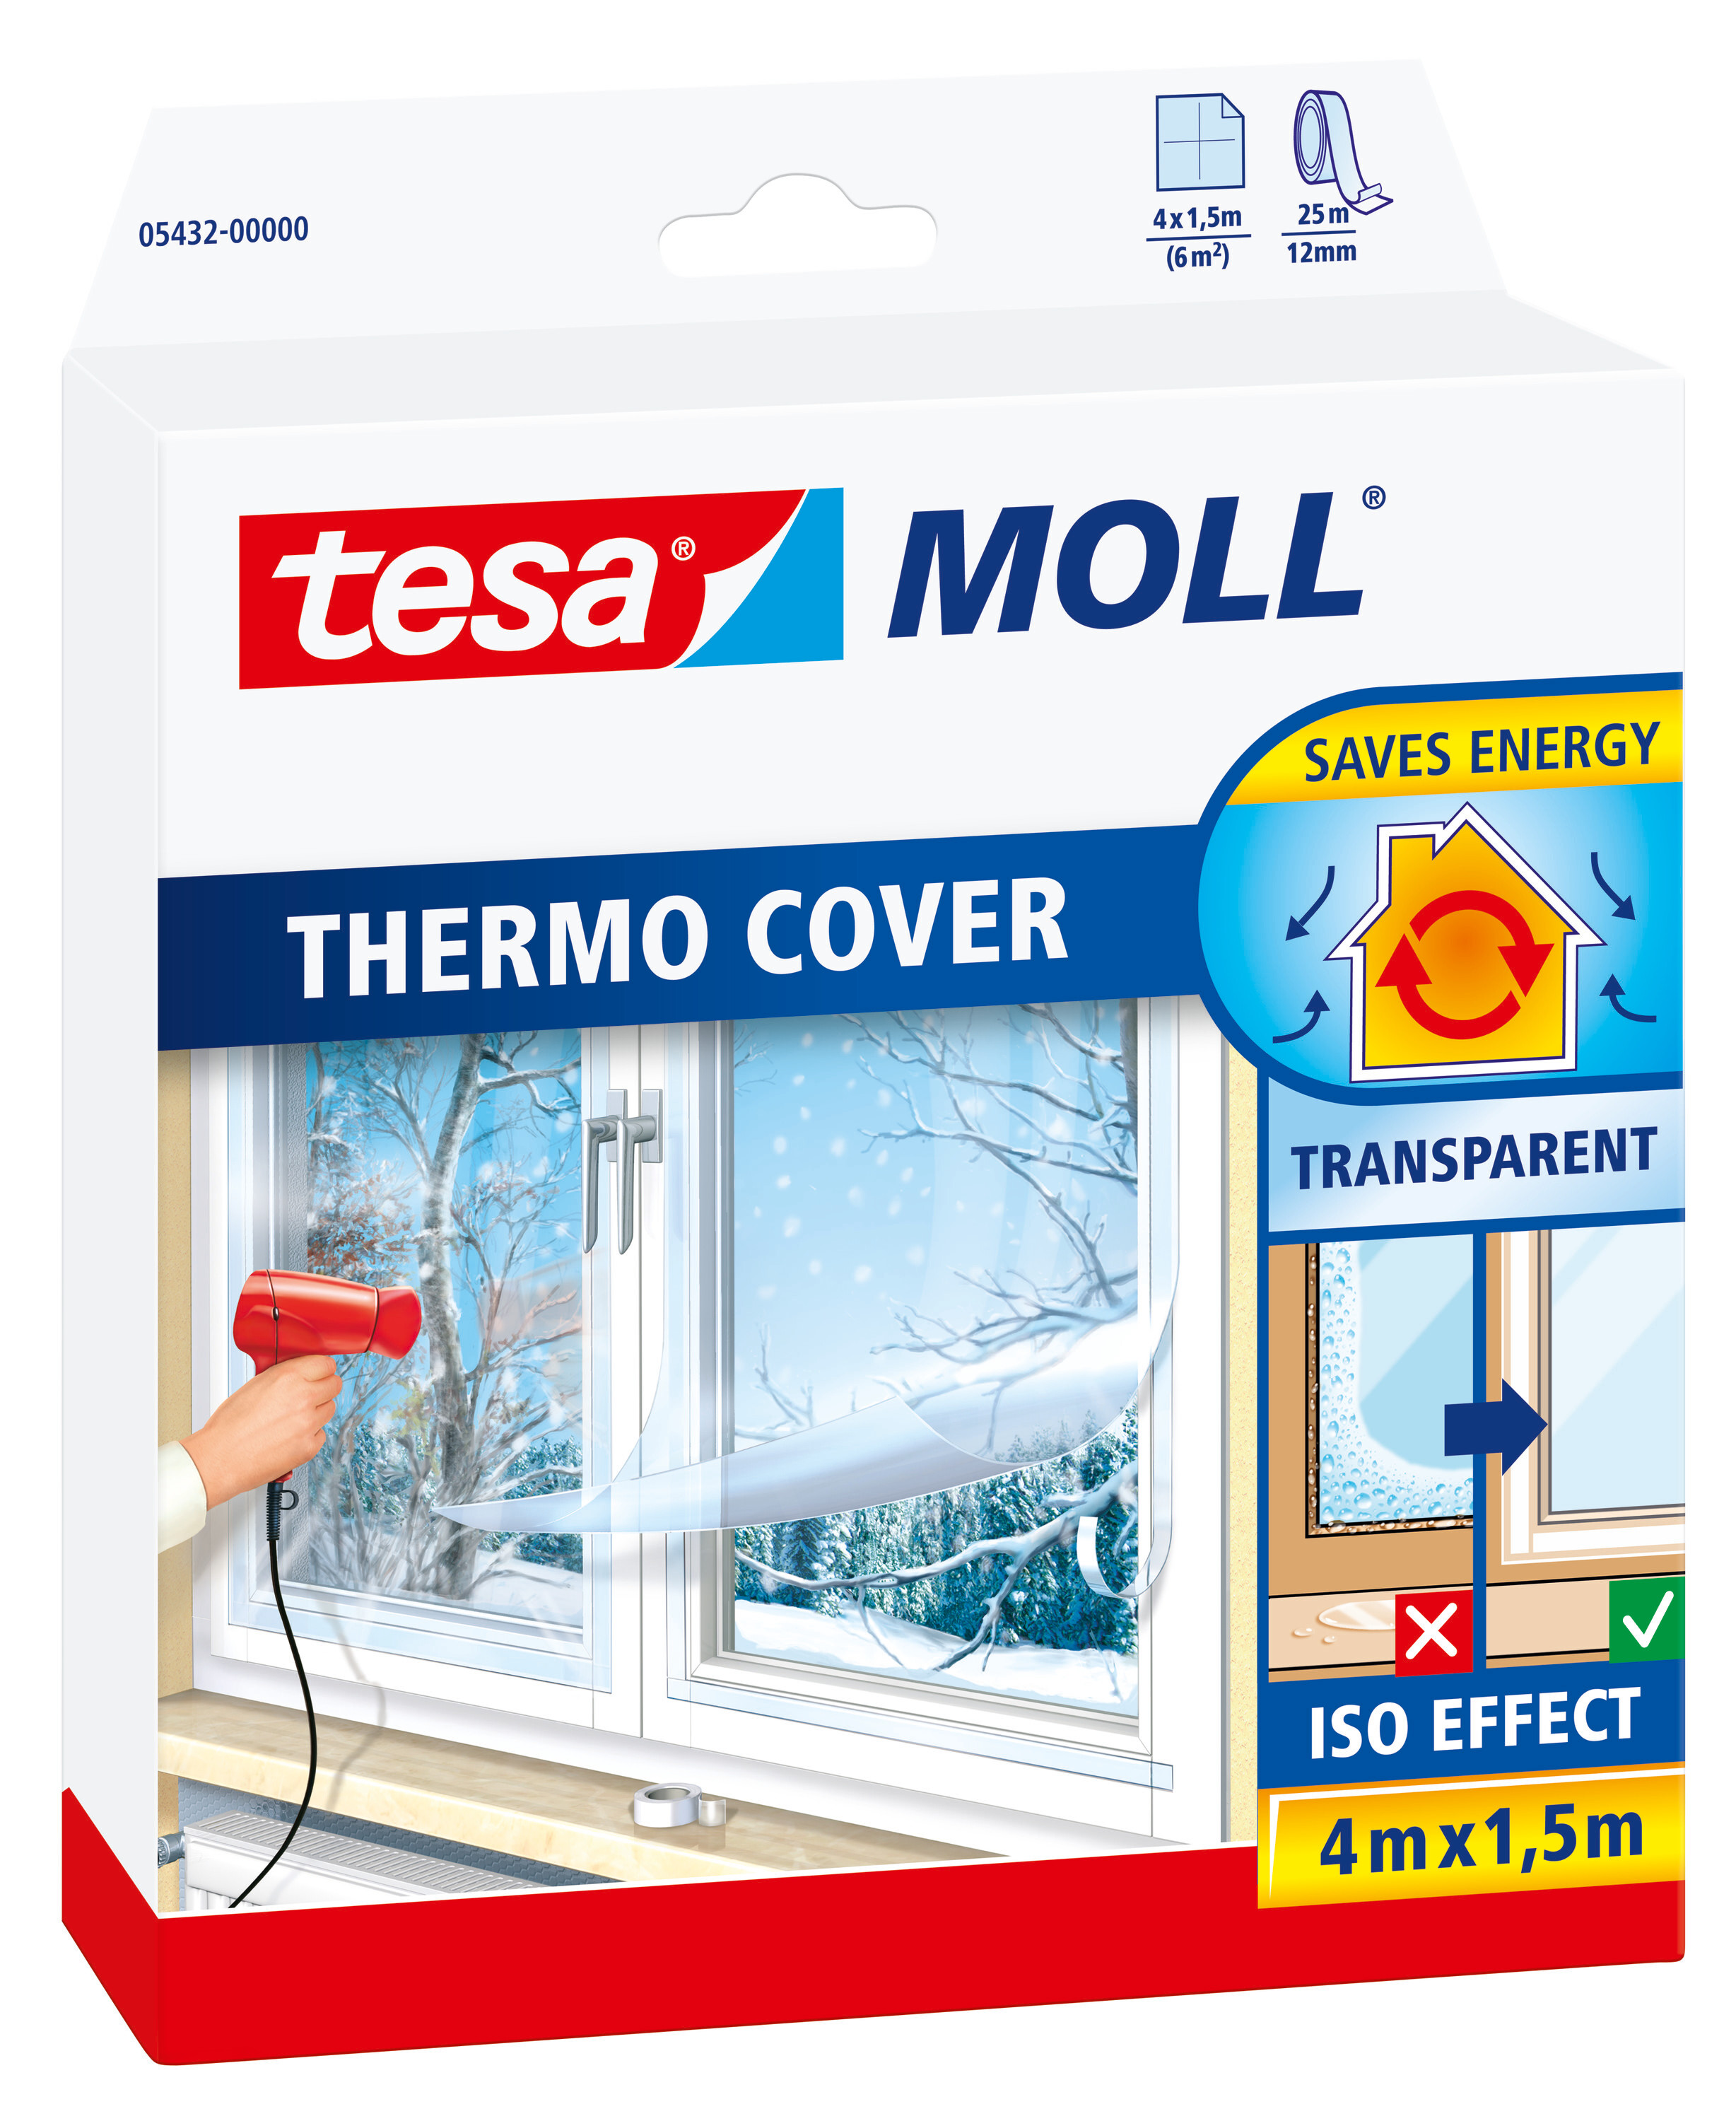 tesamoll Thermo Cover Isolierfolie Fenster (1